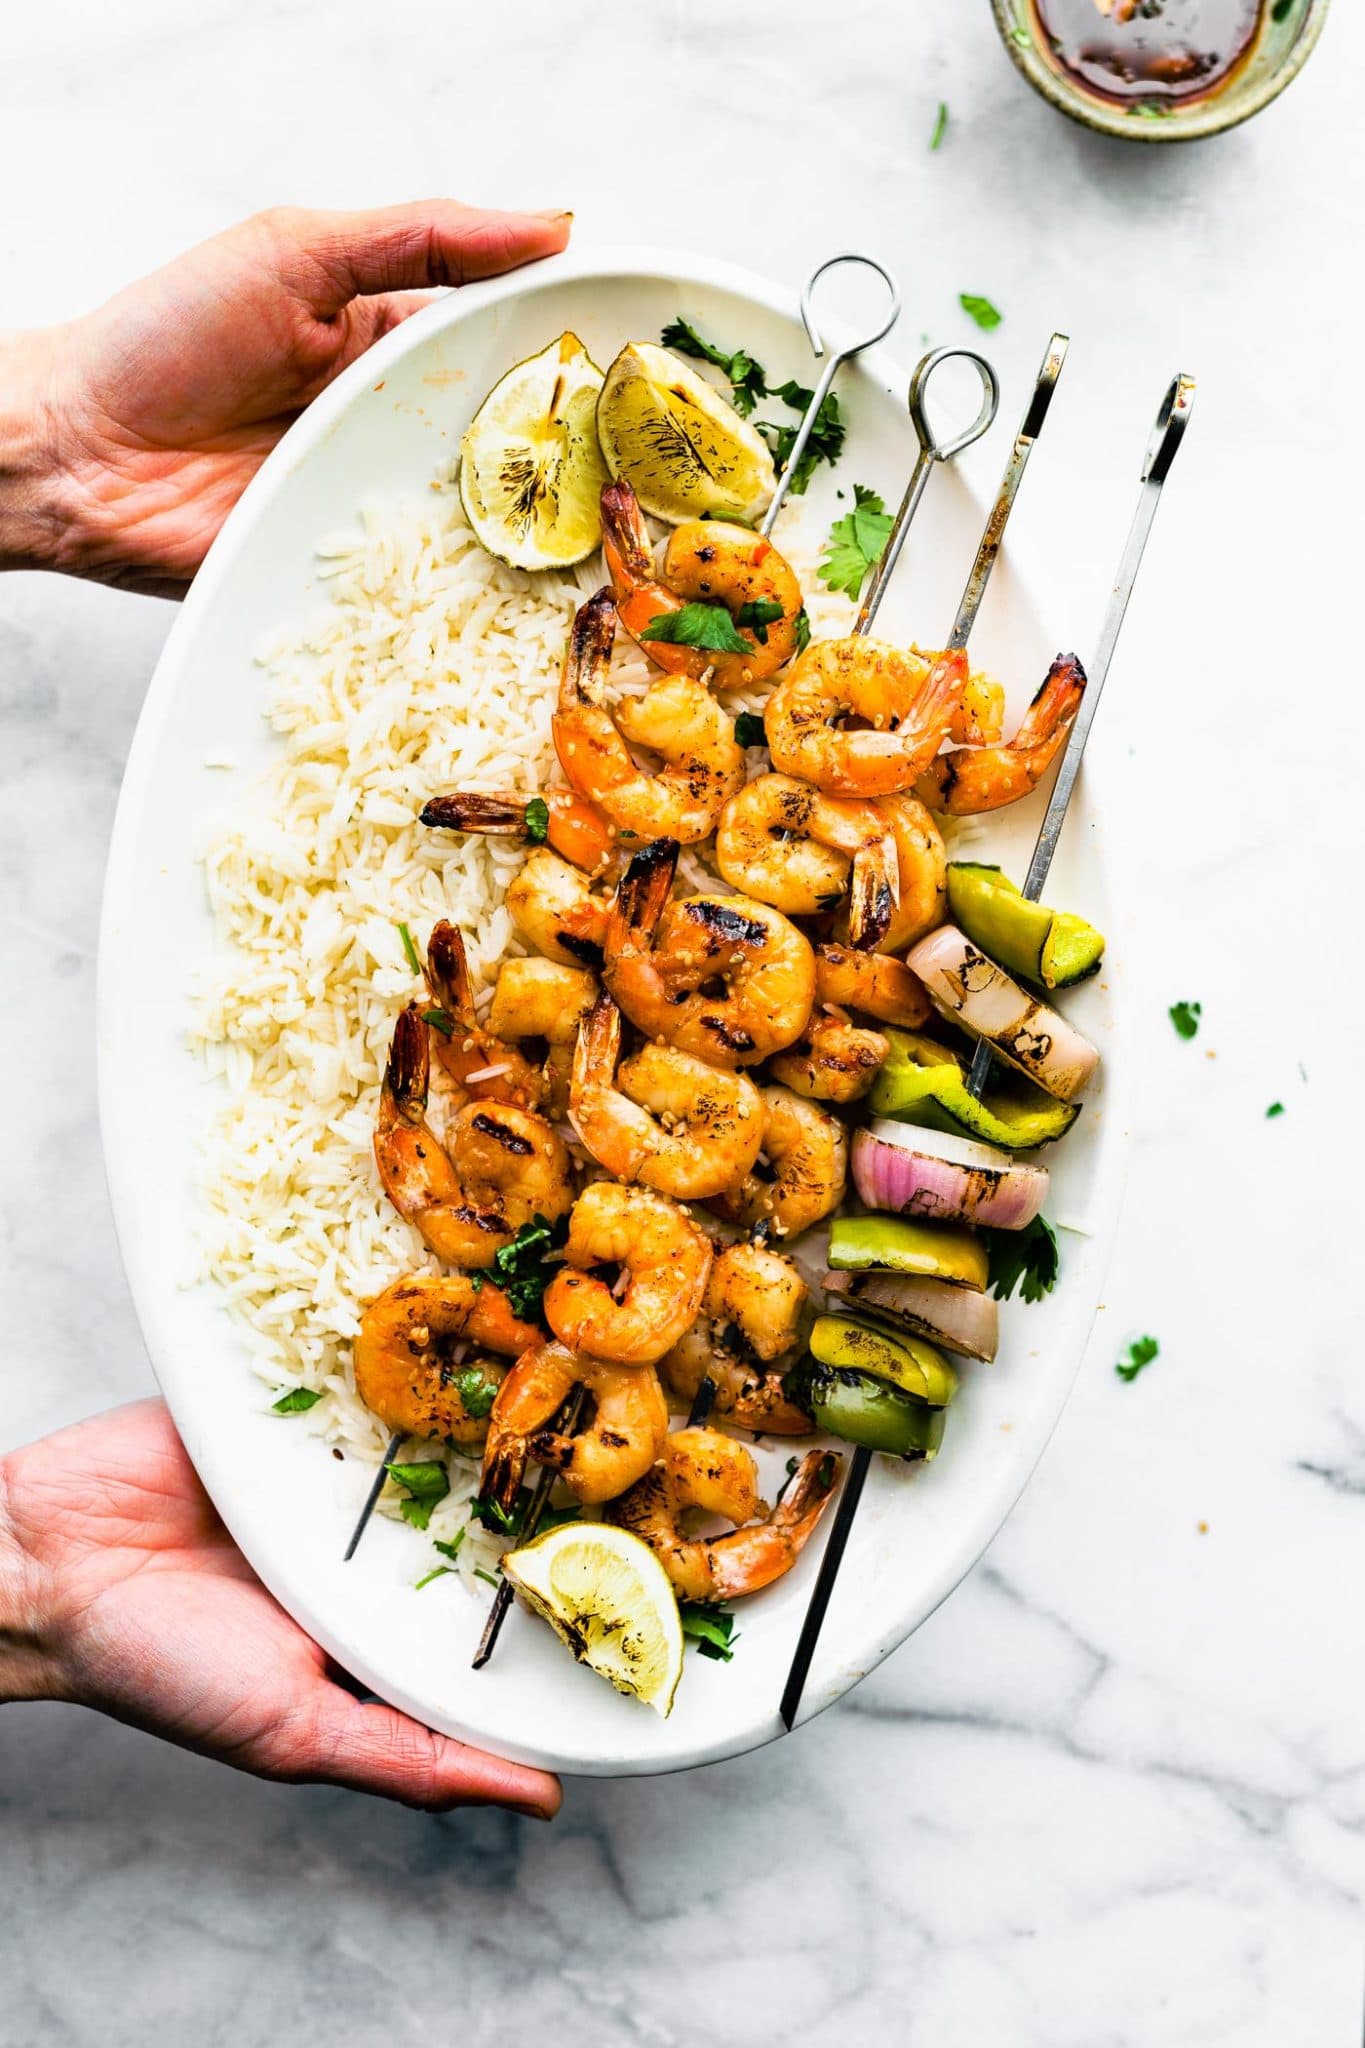 Two hands holding white platter filled with chile ginger marinated shrimp on skewers, grilled, white rice on platter.